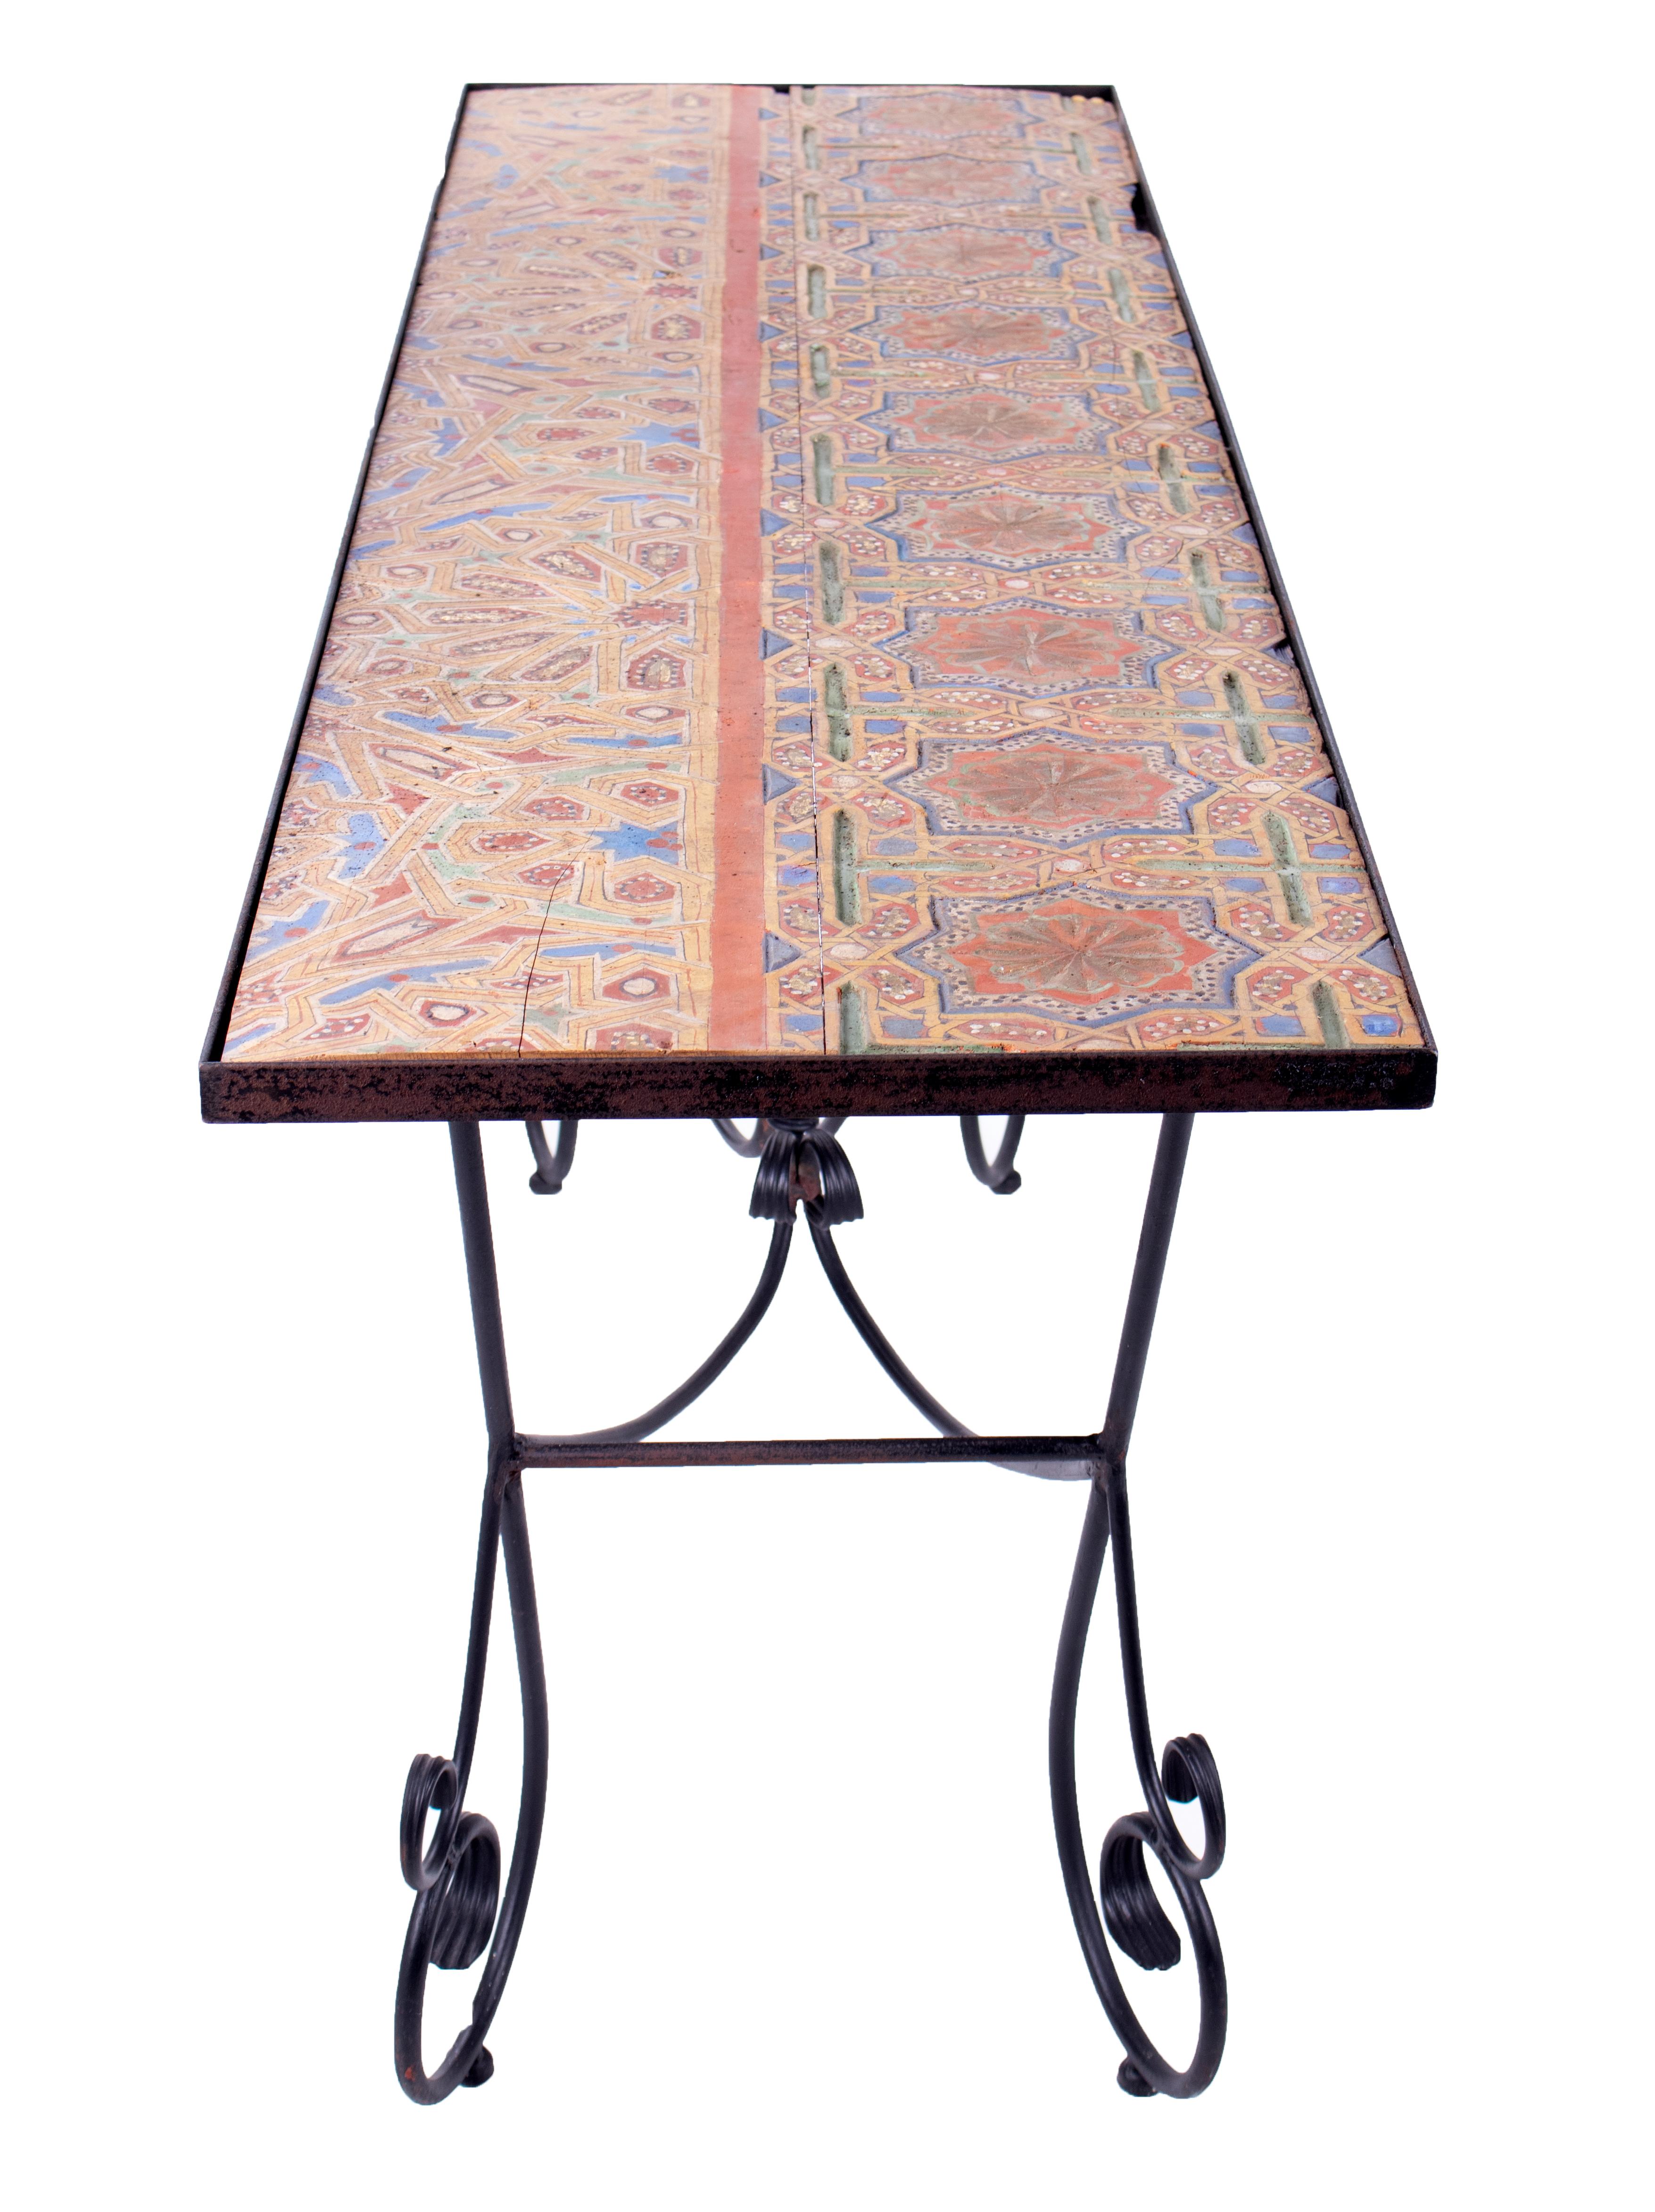 Polychromed 19th Century Wooden Orientalist Painted Relief Console Table with Iron Base For Sale